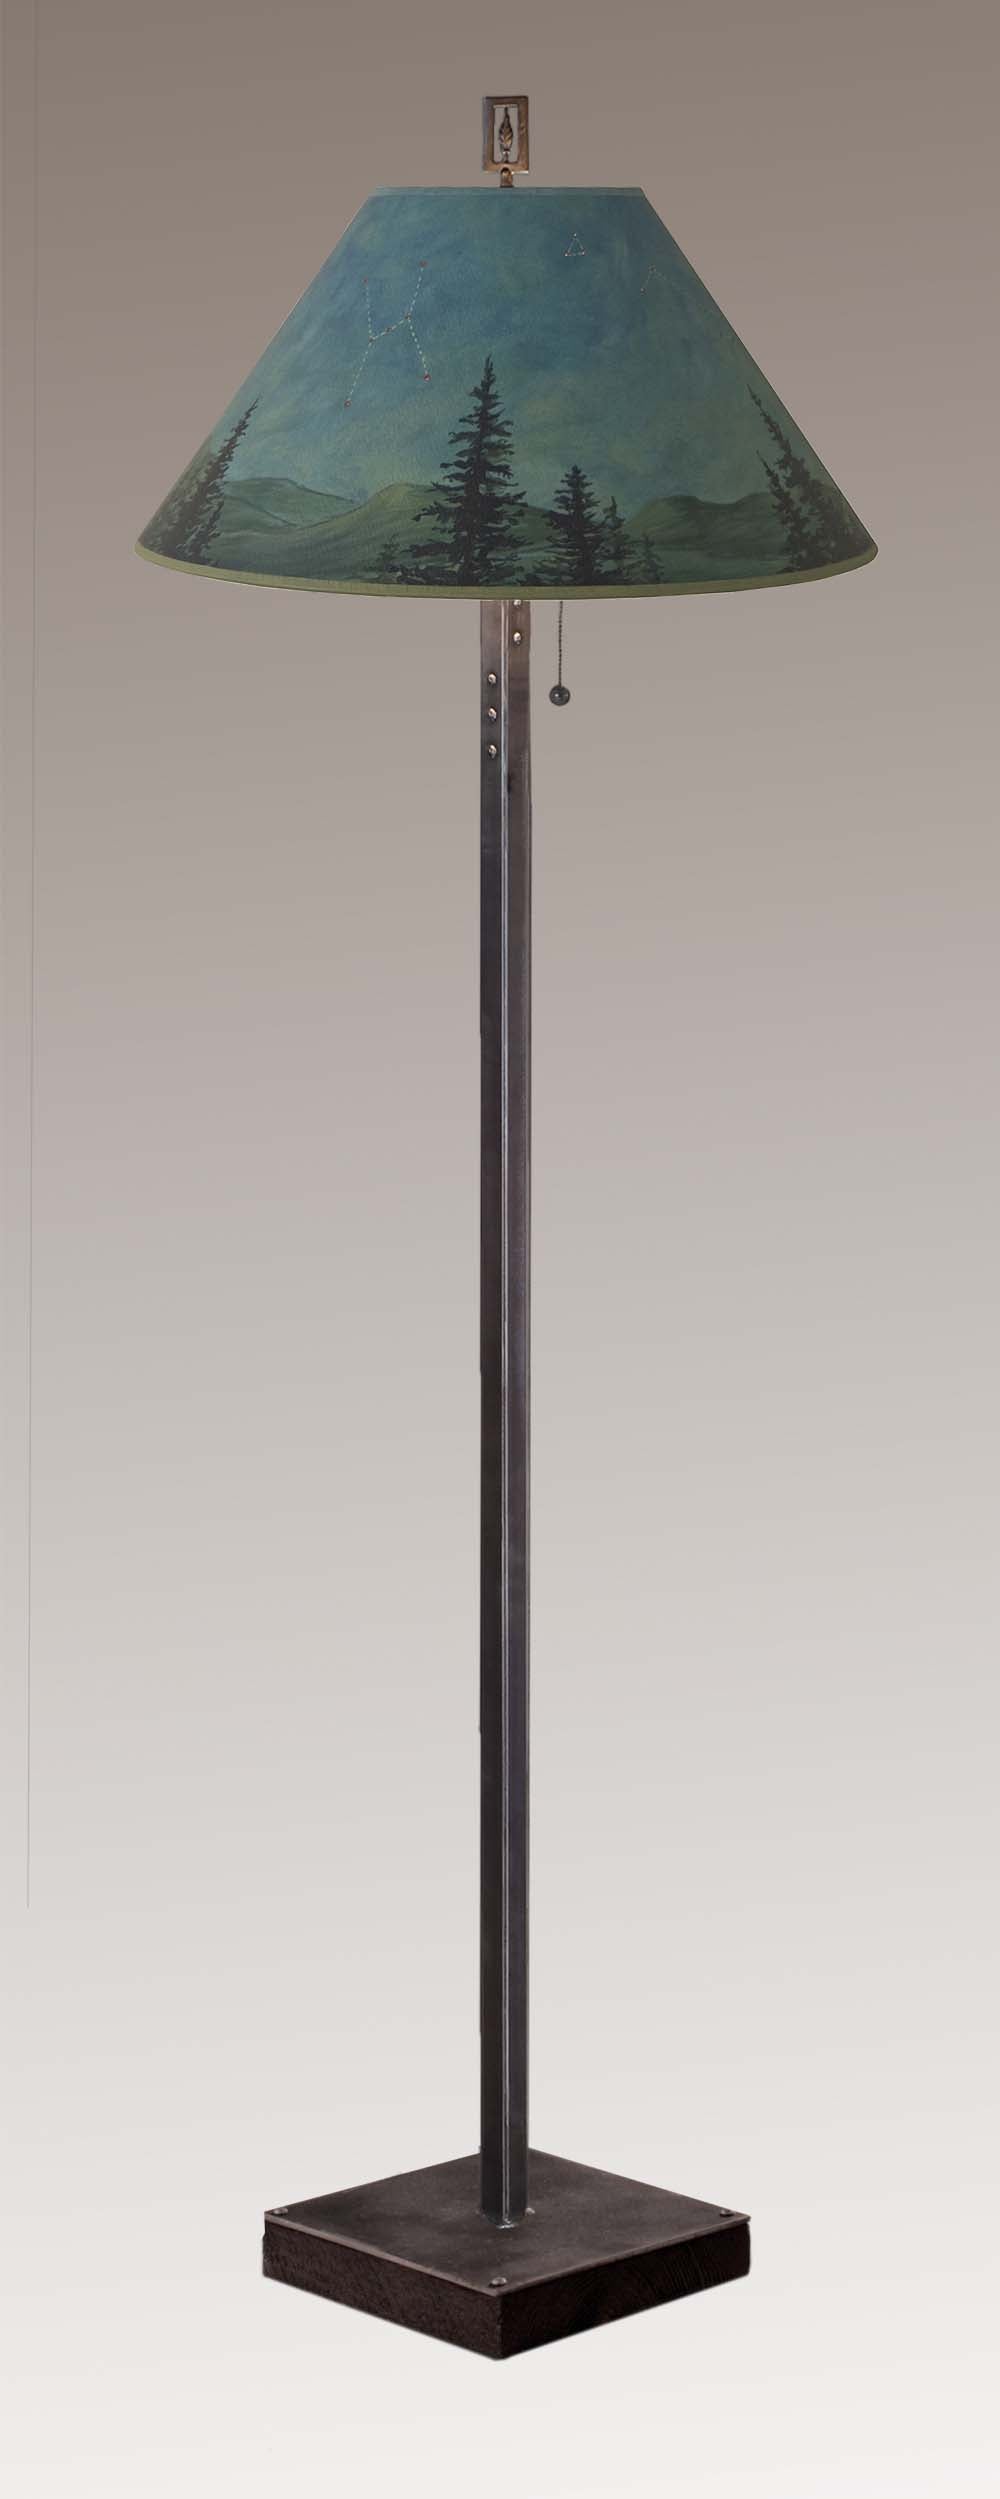 Janna Ugone &amp; Co Floor Lamps Steel Floor Lamp on  Reclaimed Wood with Large Conical Shade in Midnight Sky